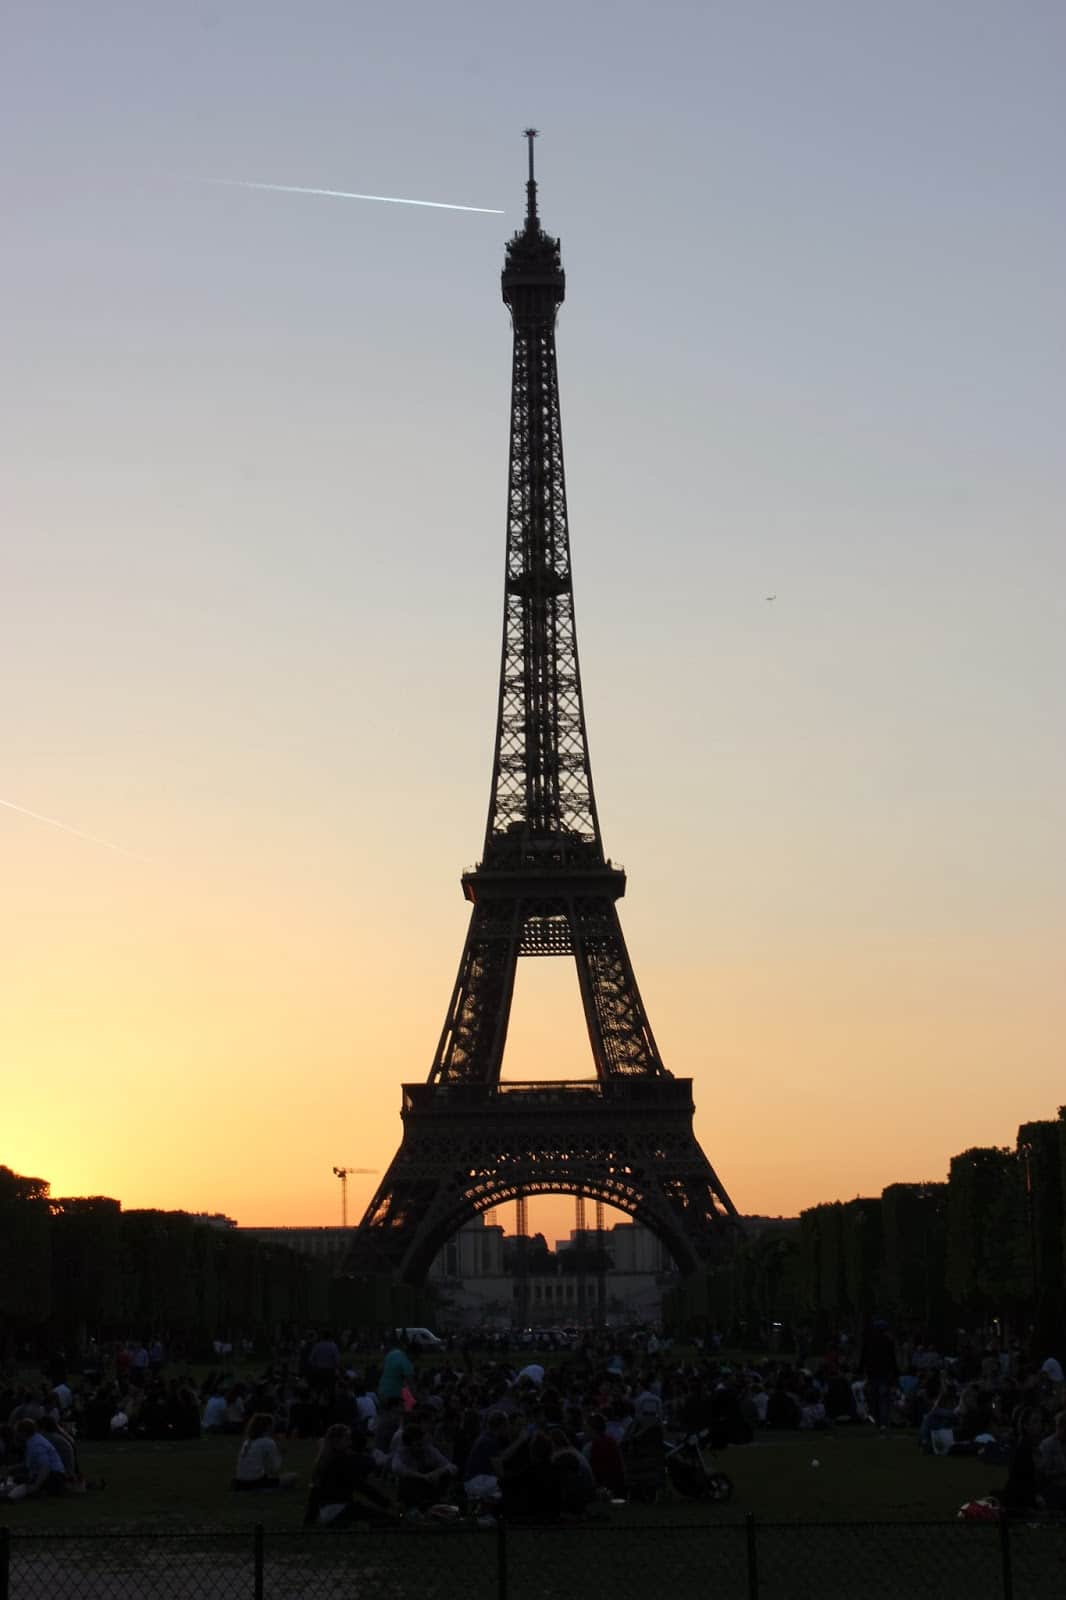 The sun setting behind the The Eiffel Tower. 